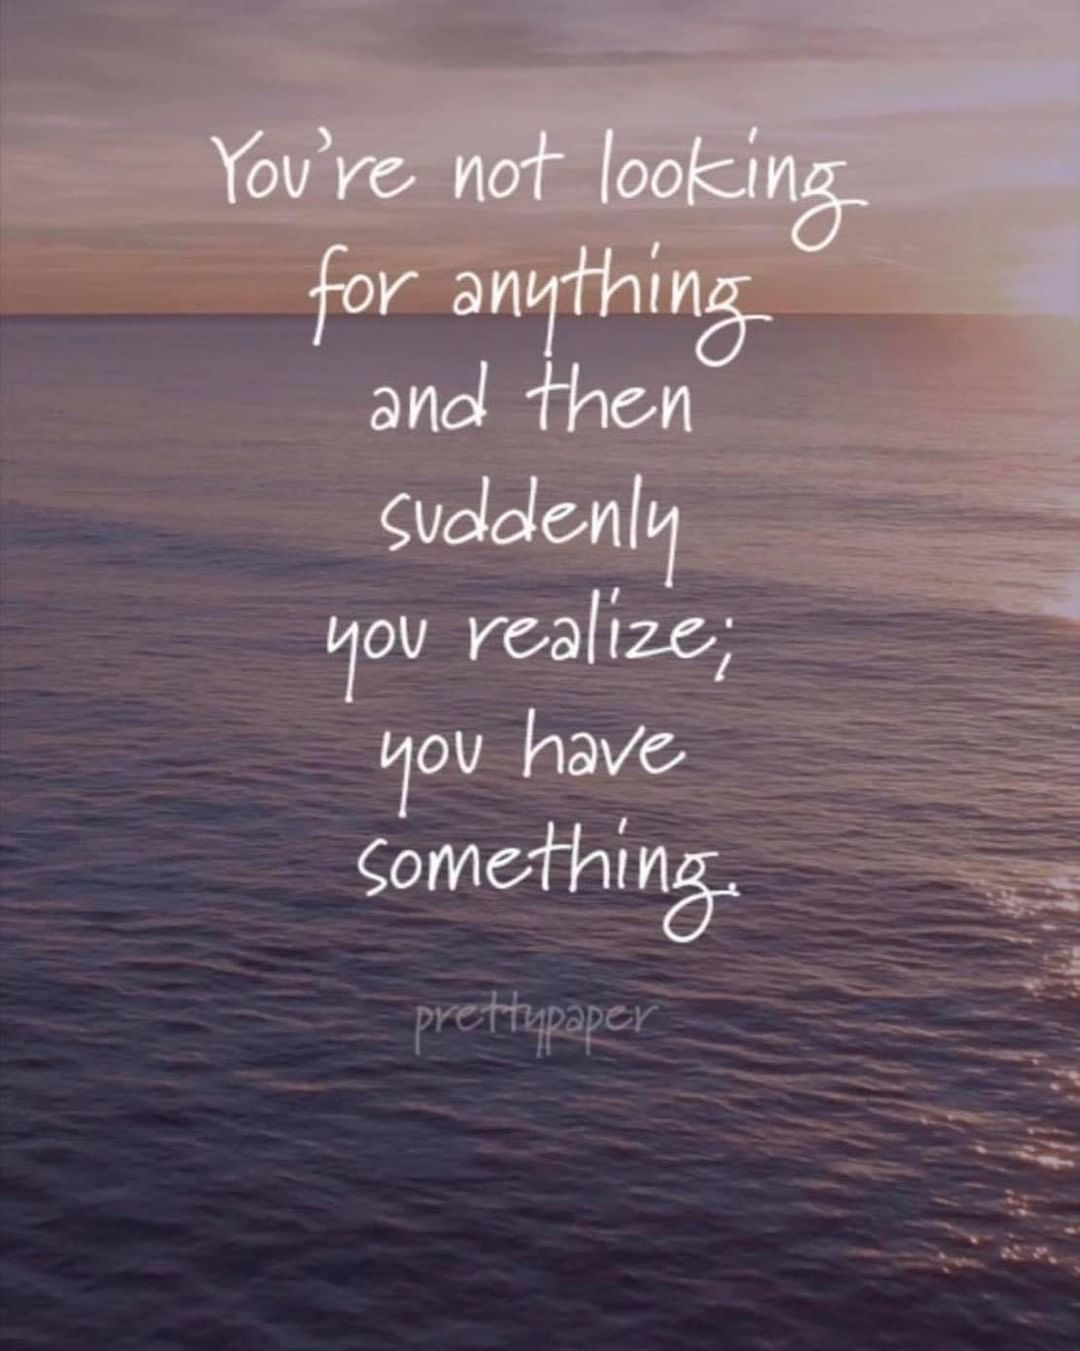 You're not looking for anything and then suddenly you realize; you have ...